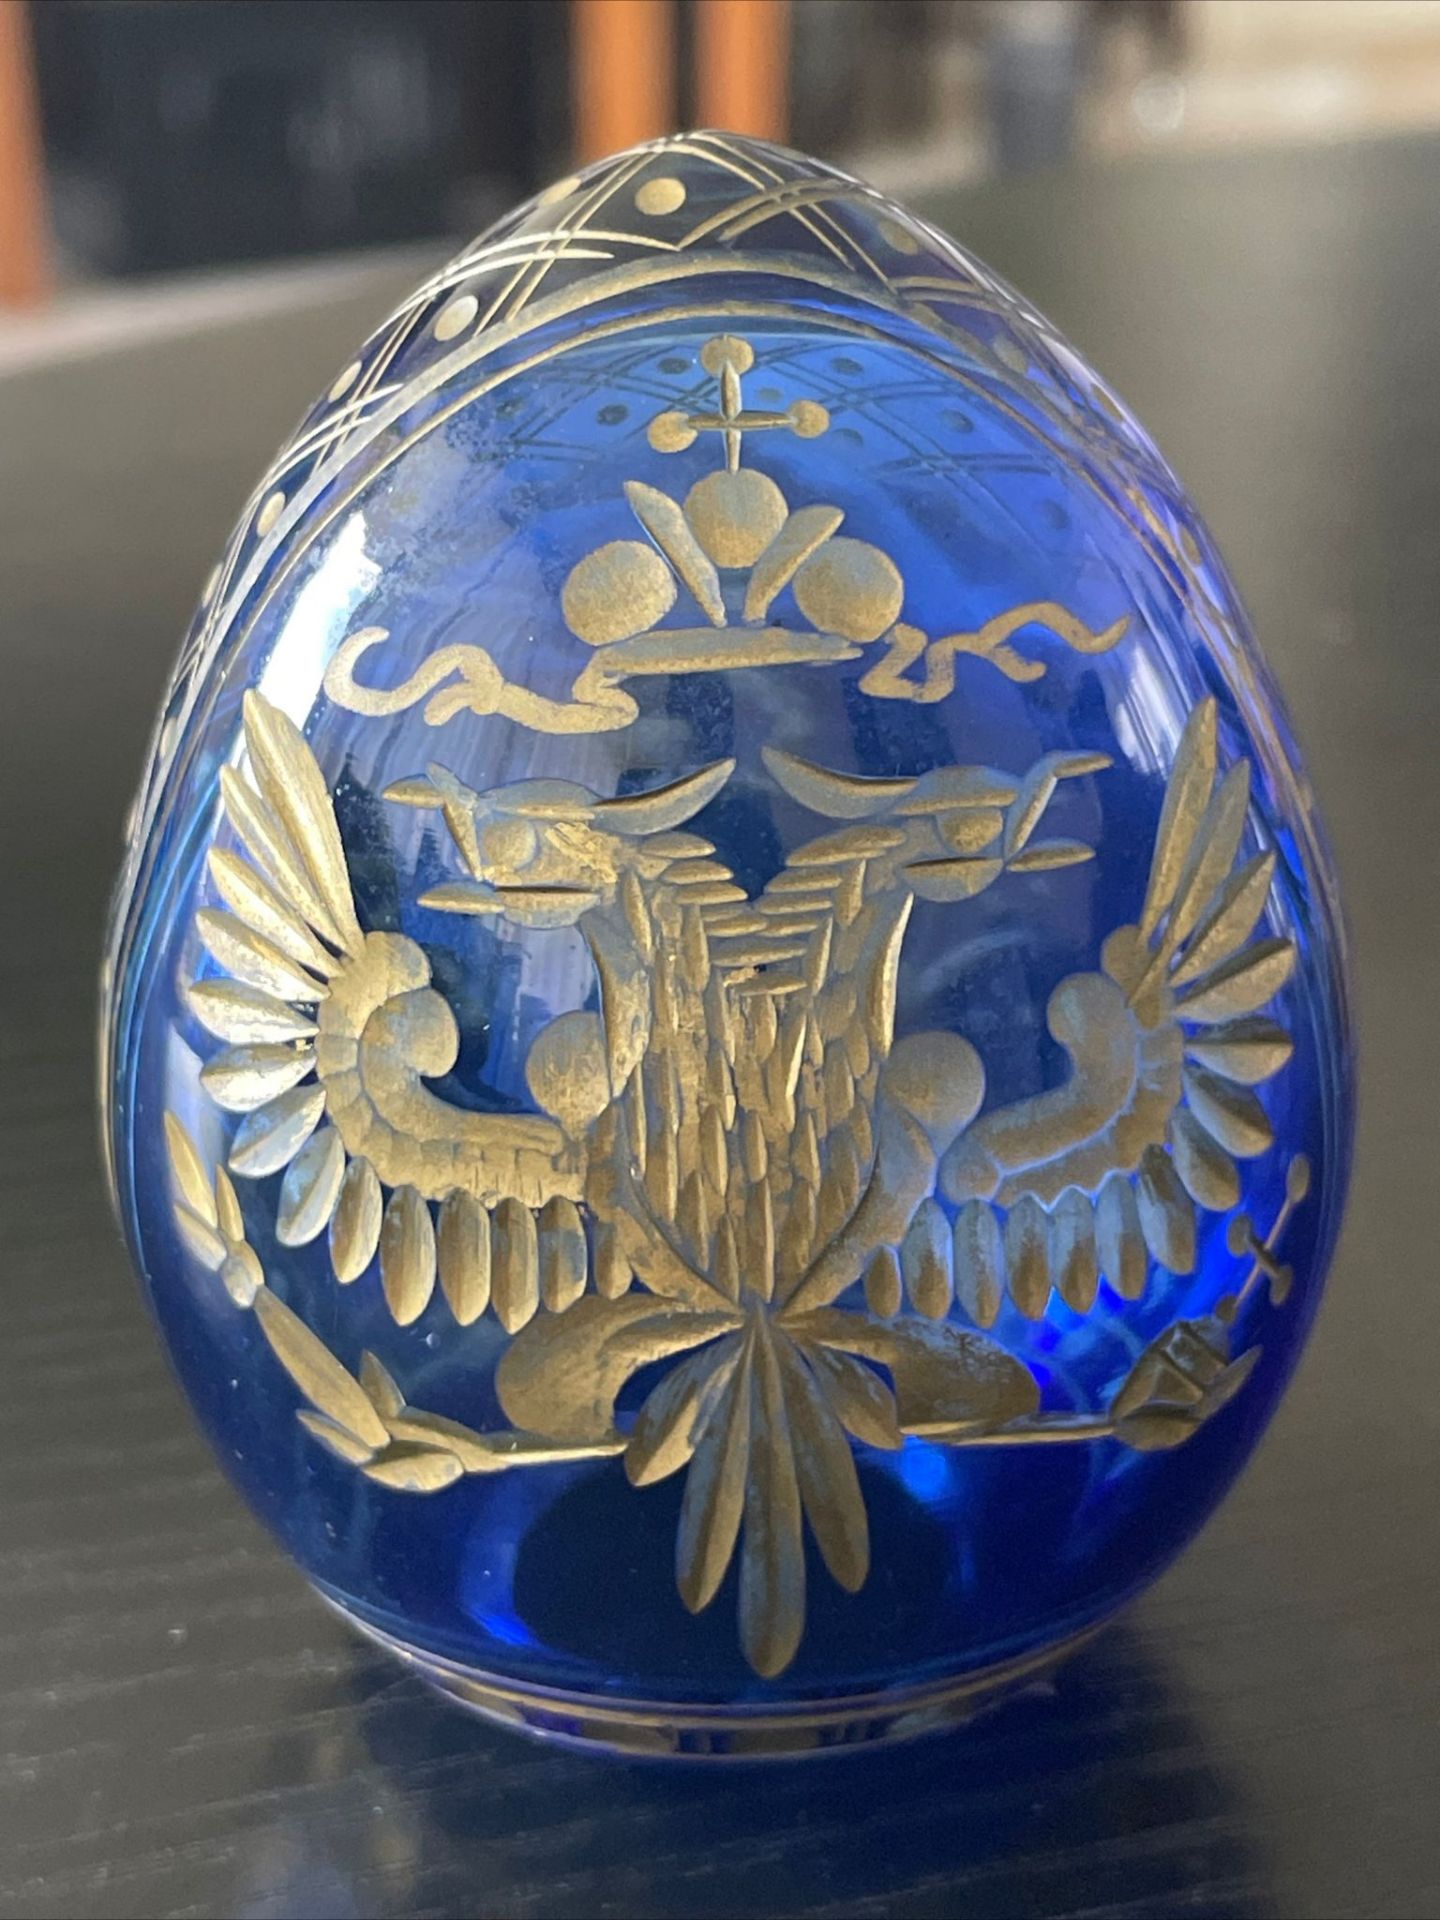 FABERGE STYLE RUSSIAN BLUE GLASS EGG IN EXCELLENT CONDITION